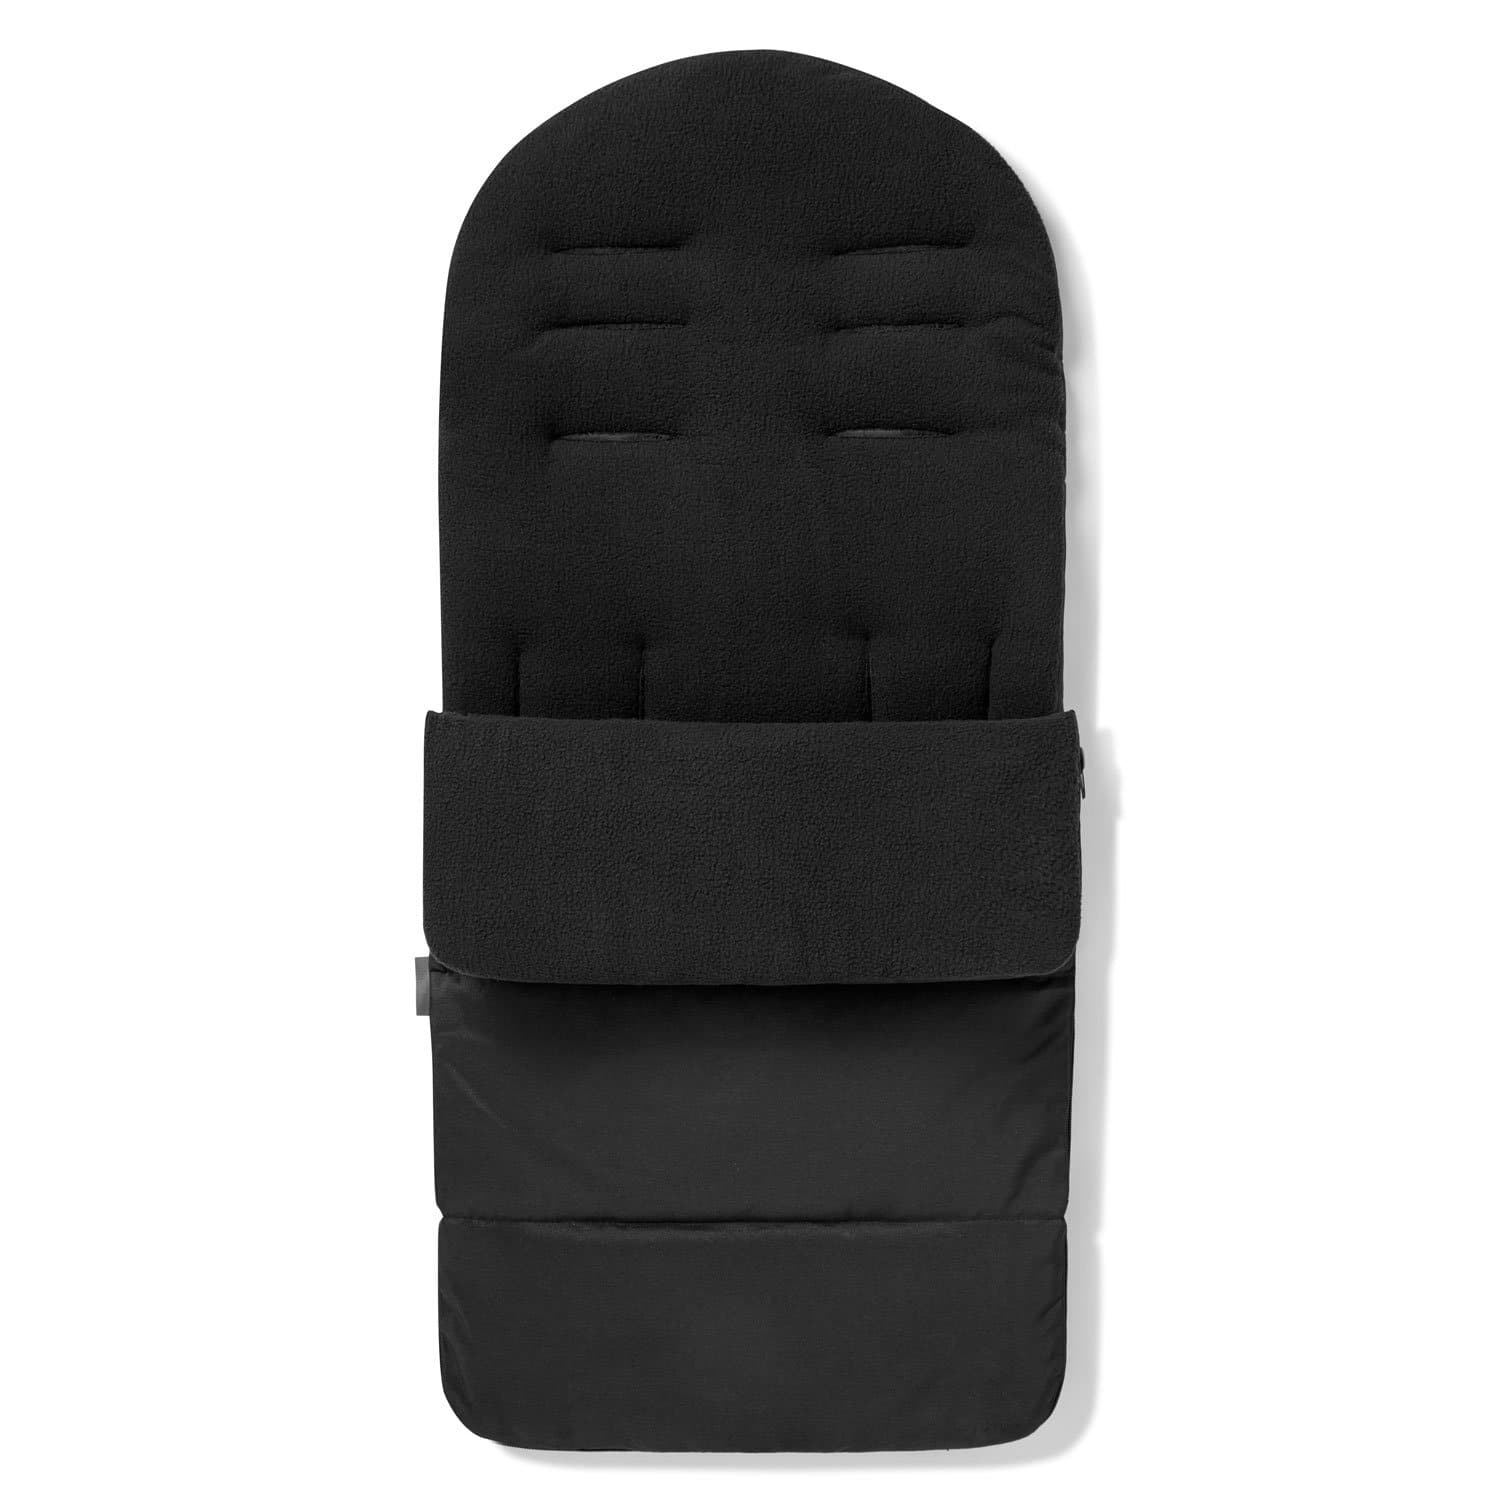 Universal Premium Pushchair Footmuff / Cosy Toes - Fits All Pushchairs / Prams And Buggies - Black Jack / Fits All Models | For Your Little One